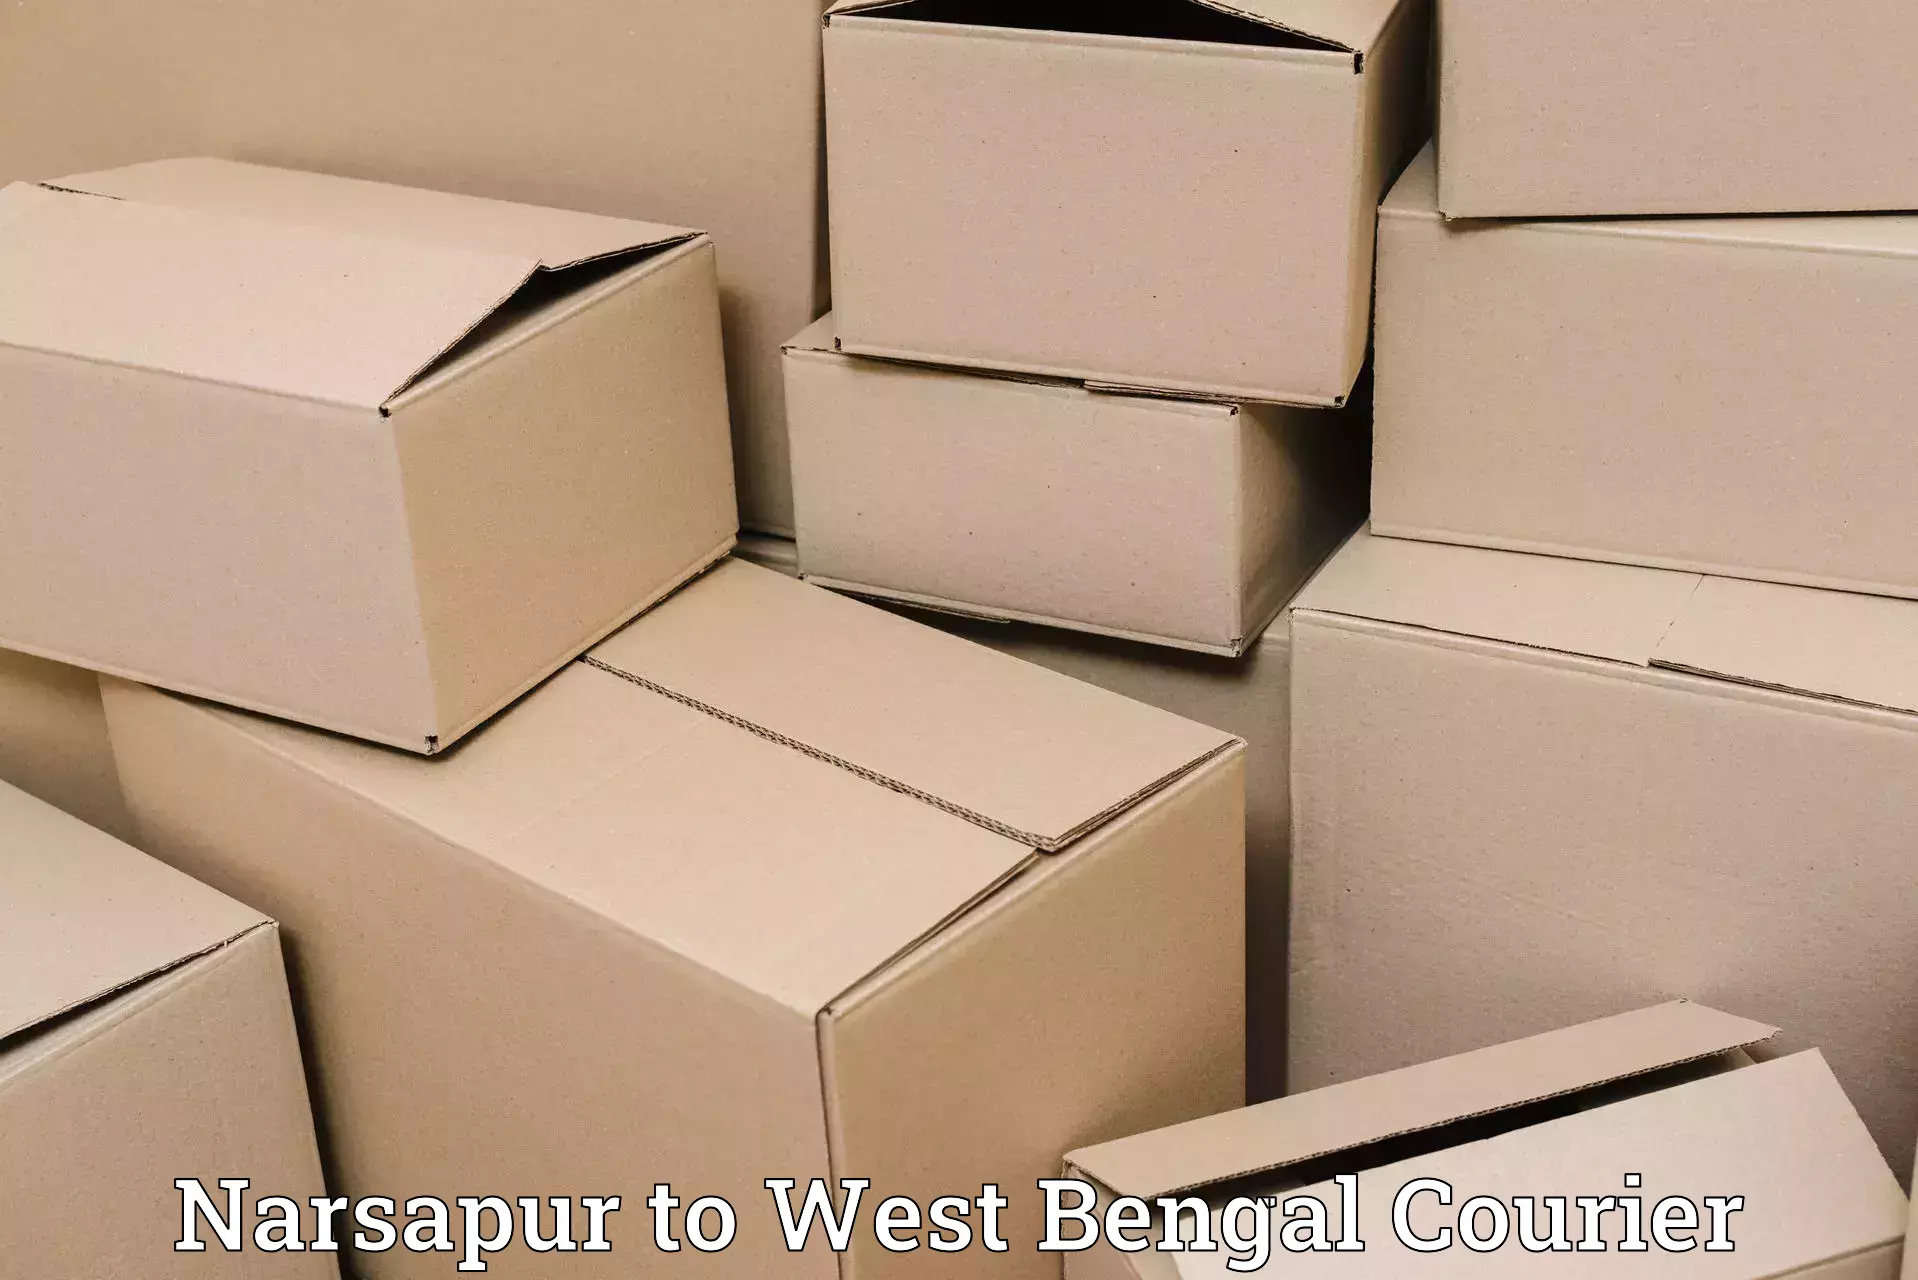 Global shipping solutions Narsapur to West Bengal